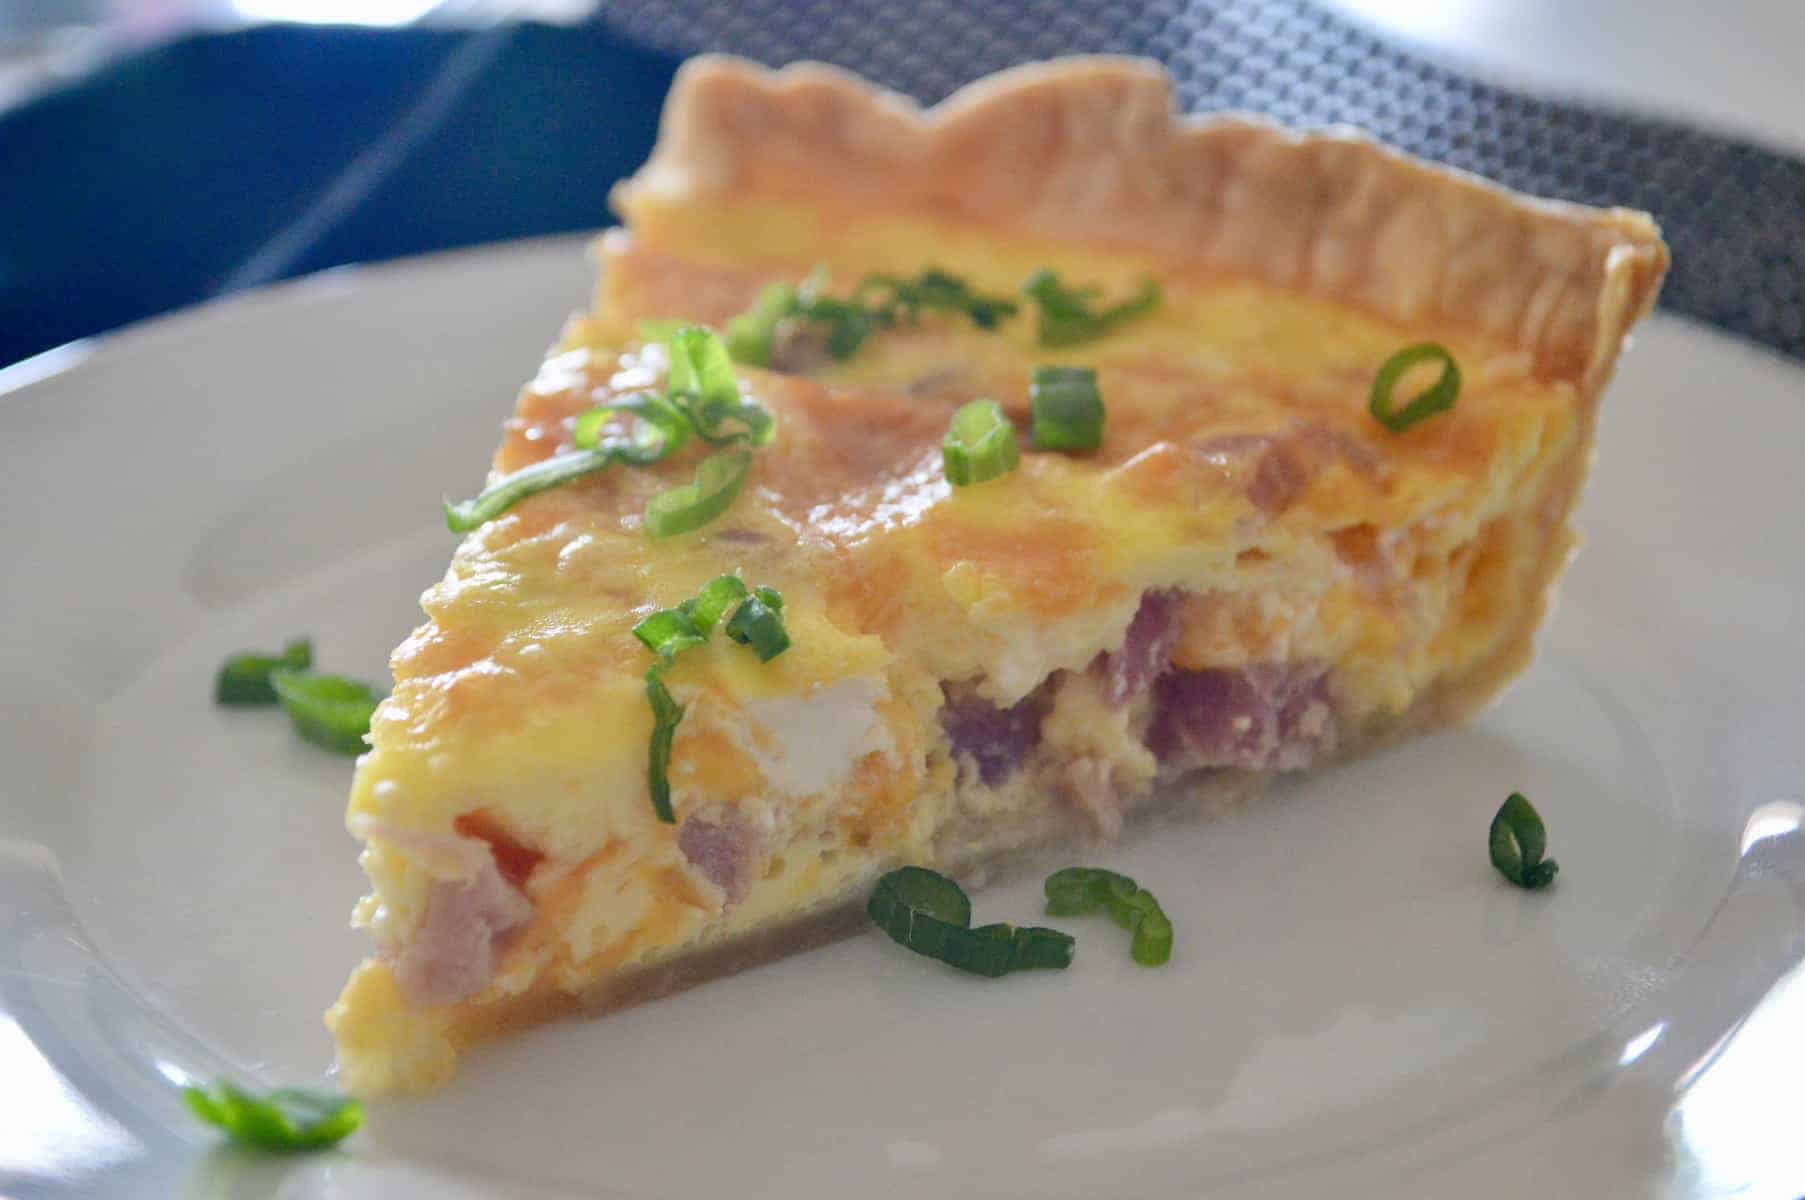 Ham and Cheese Quiche is an easy make-ahead healthy breakfast brunch egg recipe! Best Brunch Recipes. Made with pie crust, ham, cheddar, and eggs, this can be frozen ahead. Great for baby showers, brunches, bridal showers, Christmas Morning, and Easter. #weekdaybreakfast #breakfast #brunch #hamandcheese #eggs #quiche #piecrust #ChristmasMorning #easyrecipe #healthy #parenting #kidsfood